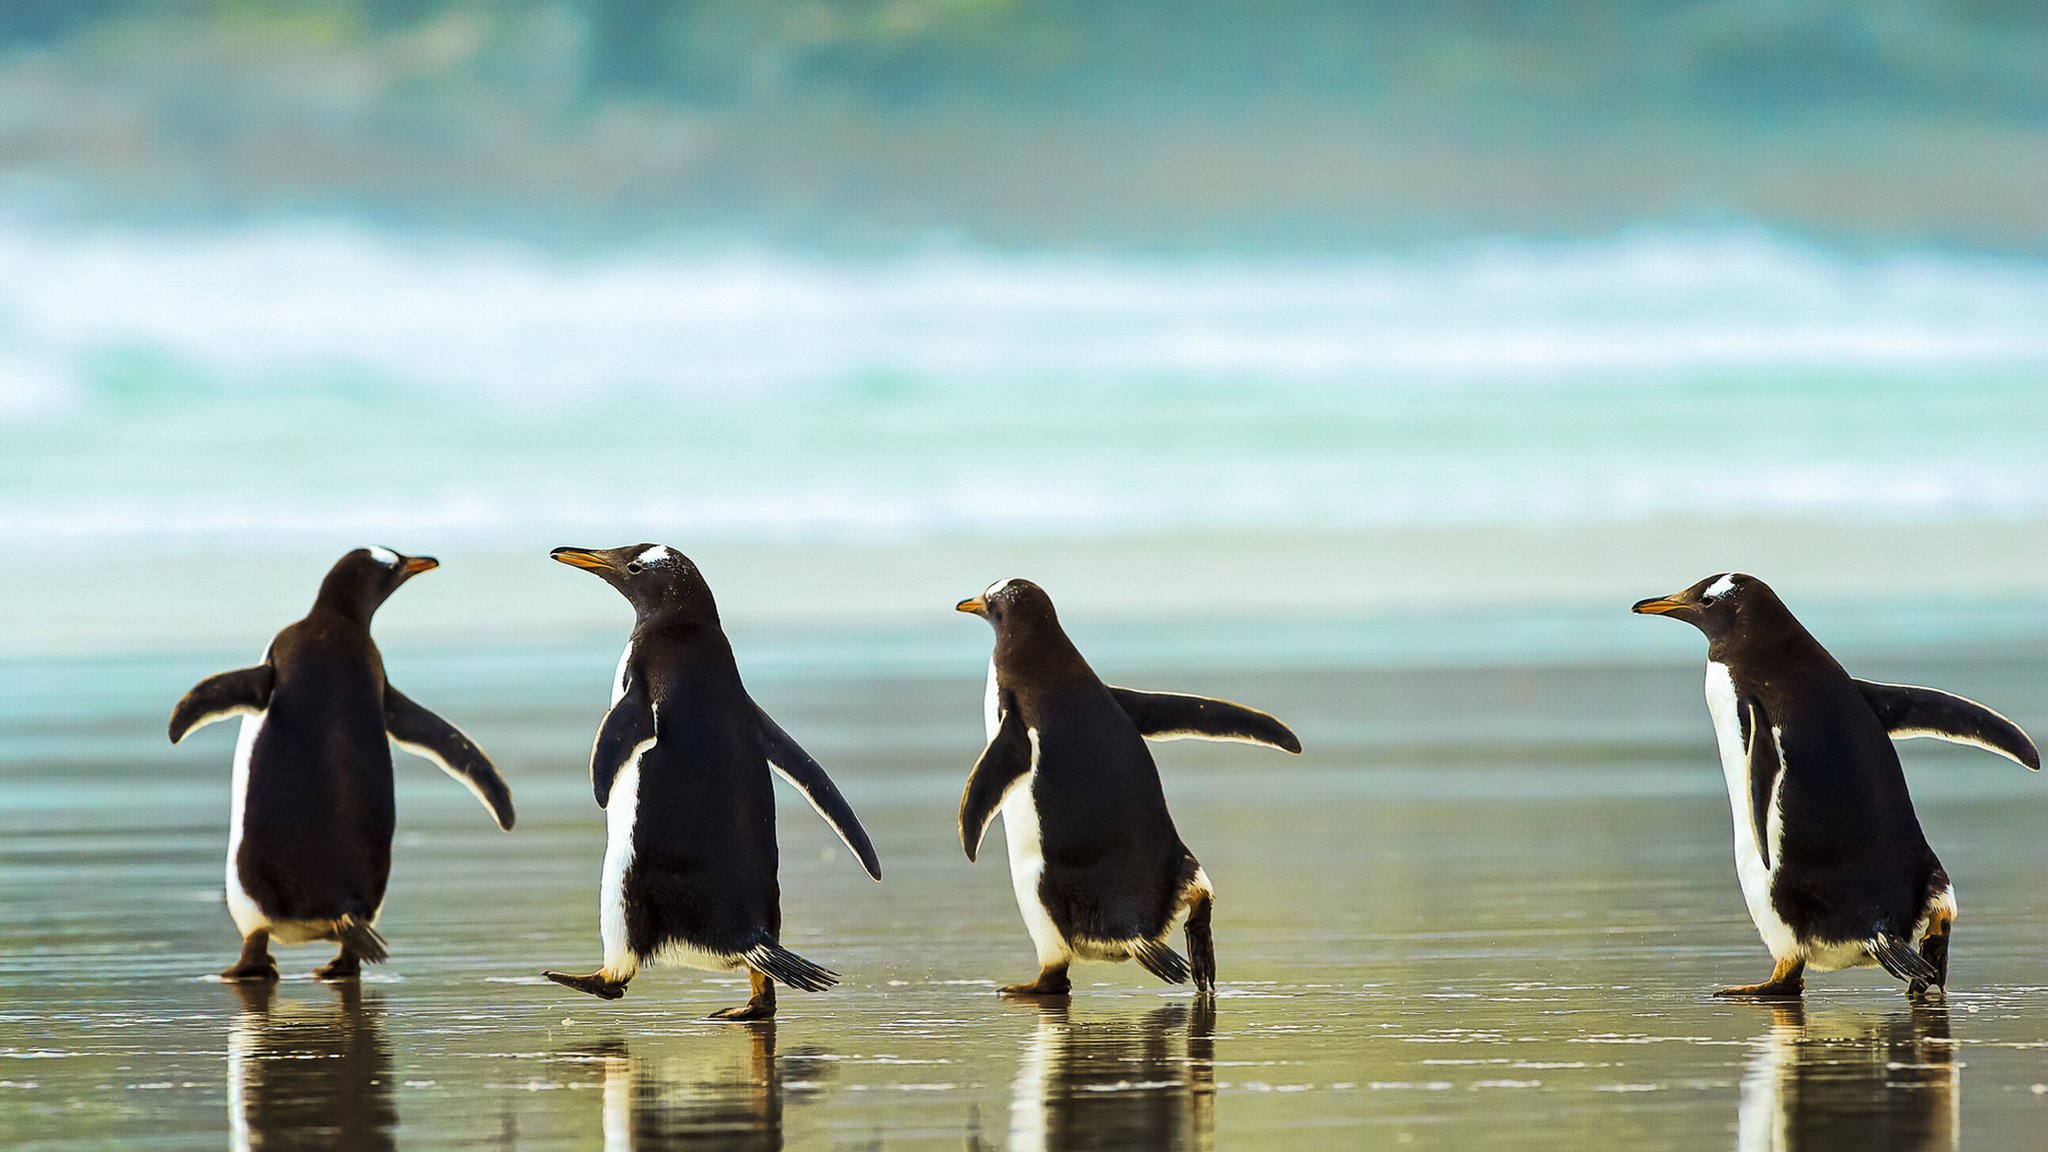 Gentoo penguins are four species not two say researchers - CBBC Newsround